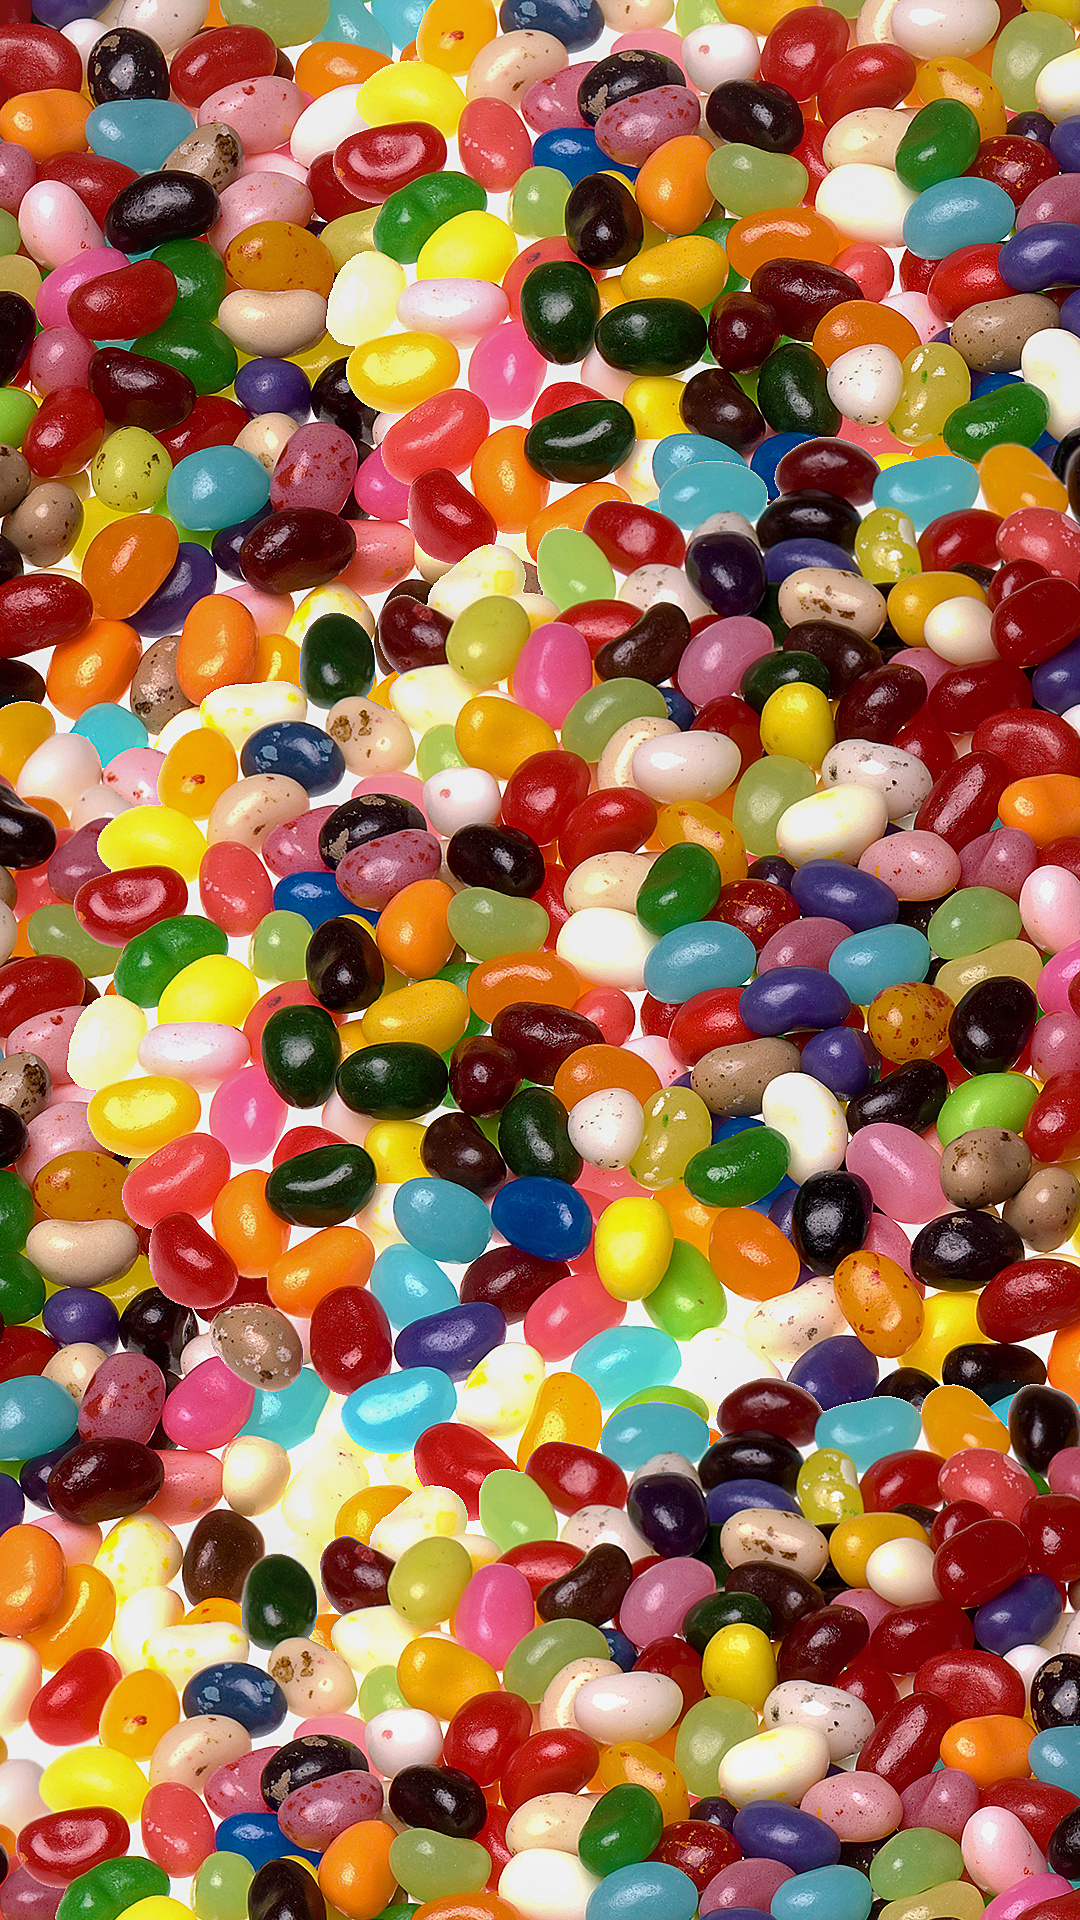 Colorful candy assortment, Sweet treats, Tasty confections, Jelly bean flavors, 1080x1920 Full HD Handy